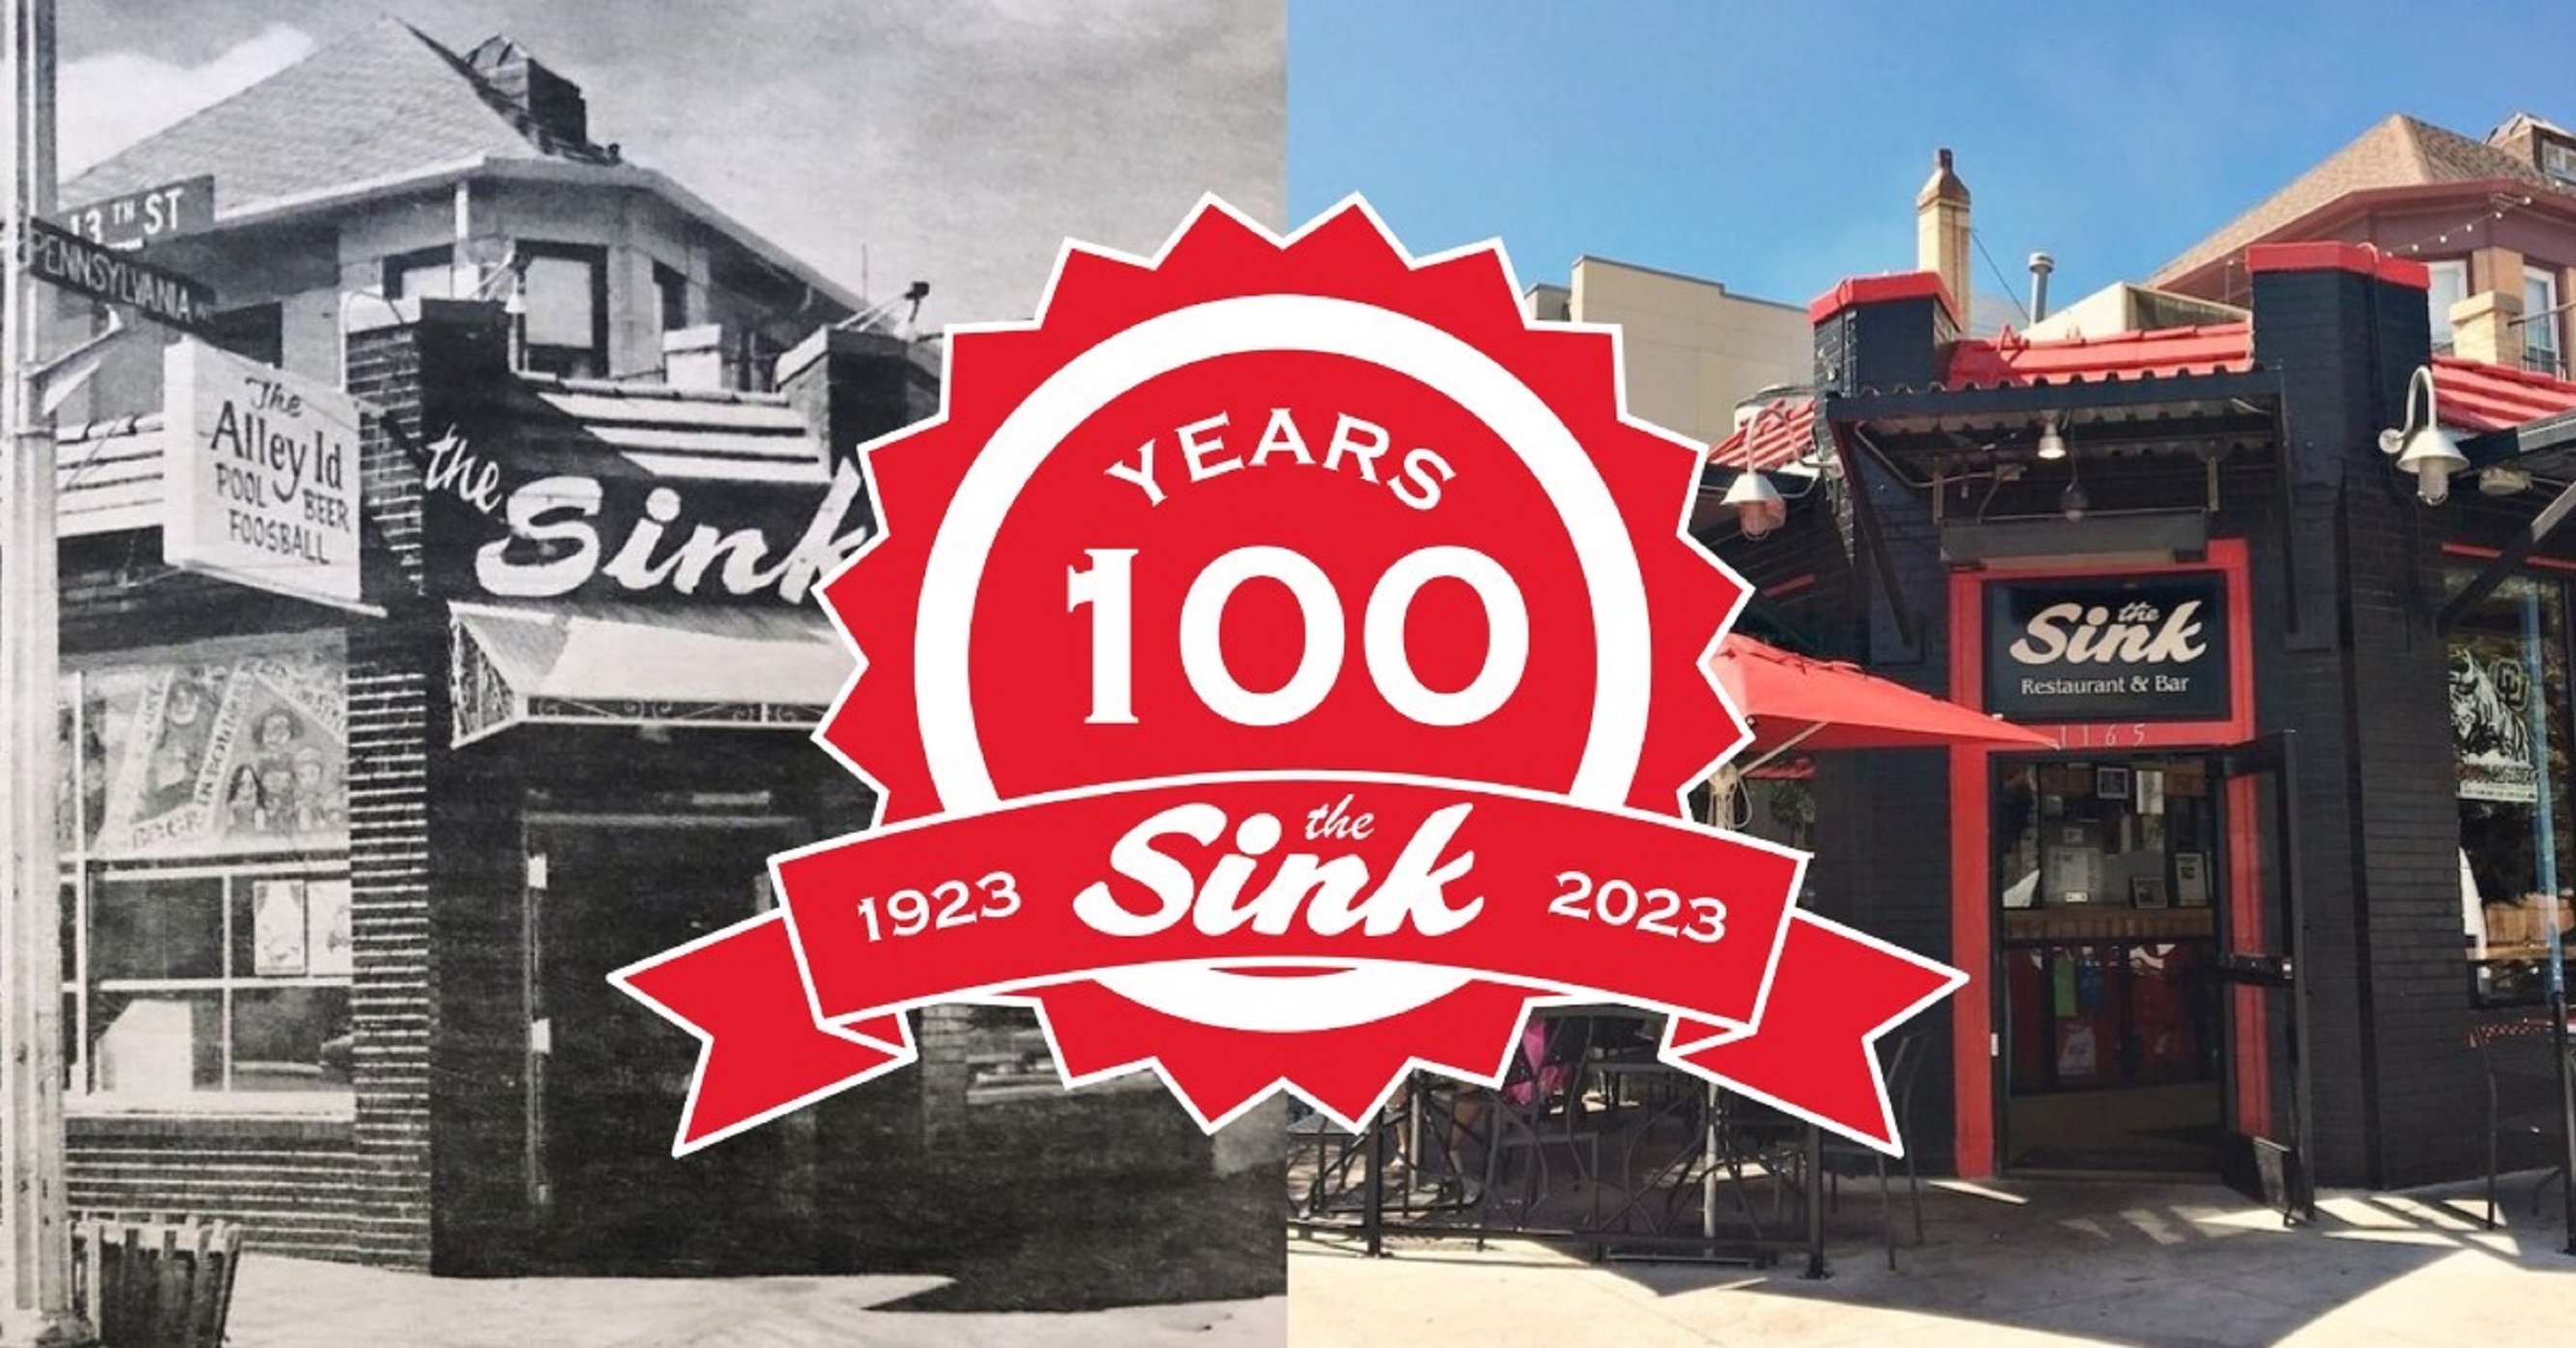 THE SINK 100TH ANNIVERSARY MOVIE PREMIERE at Boulder Theater